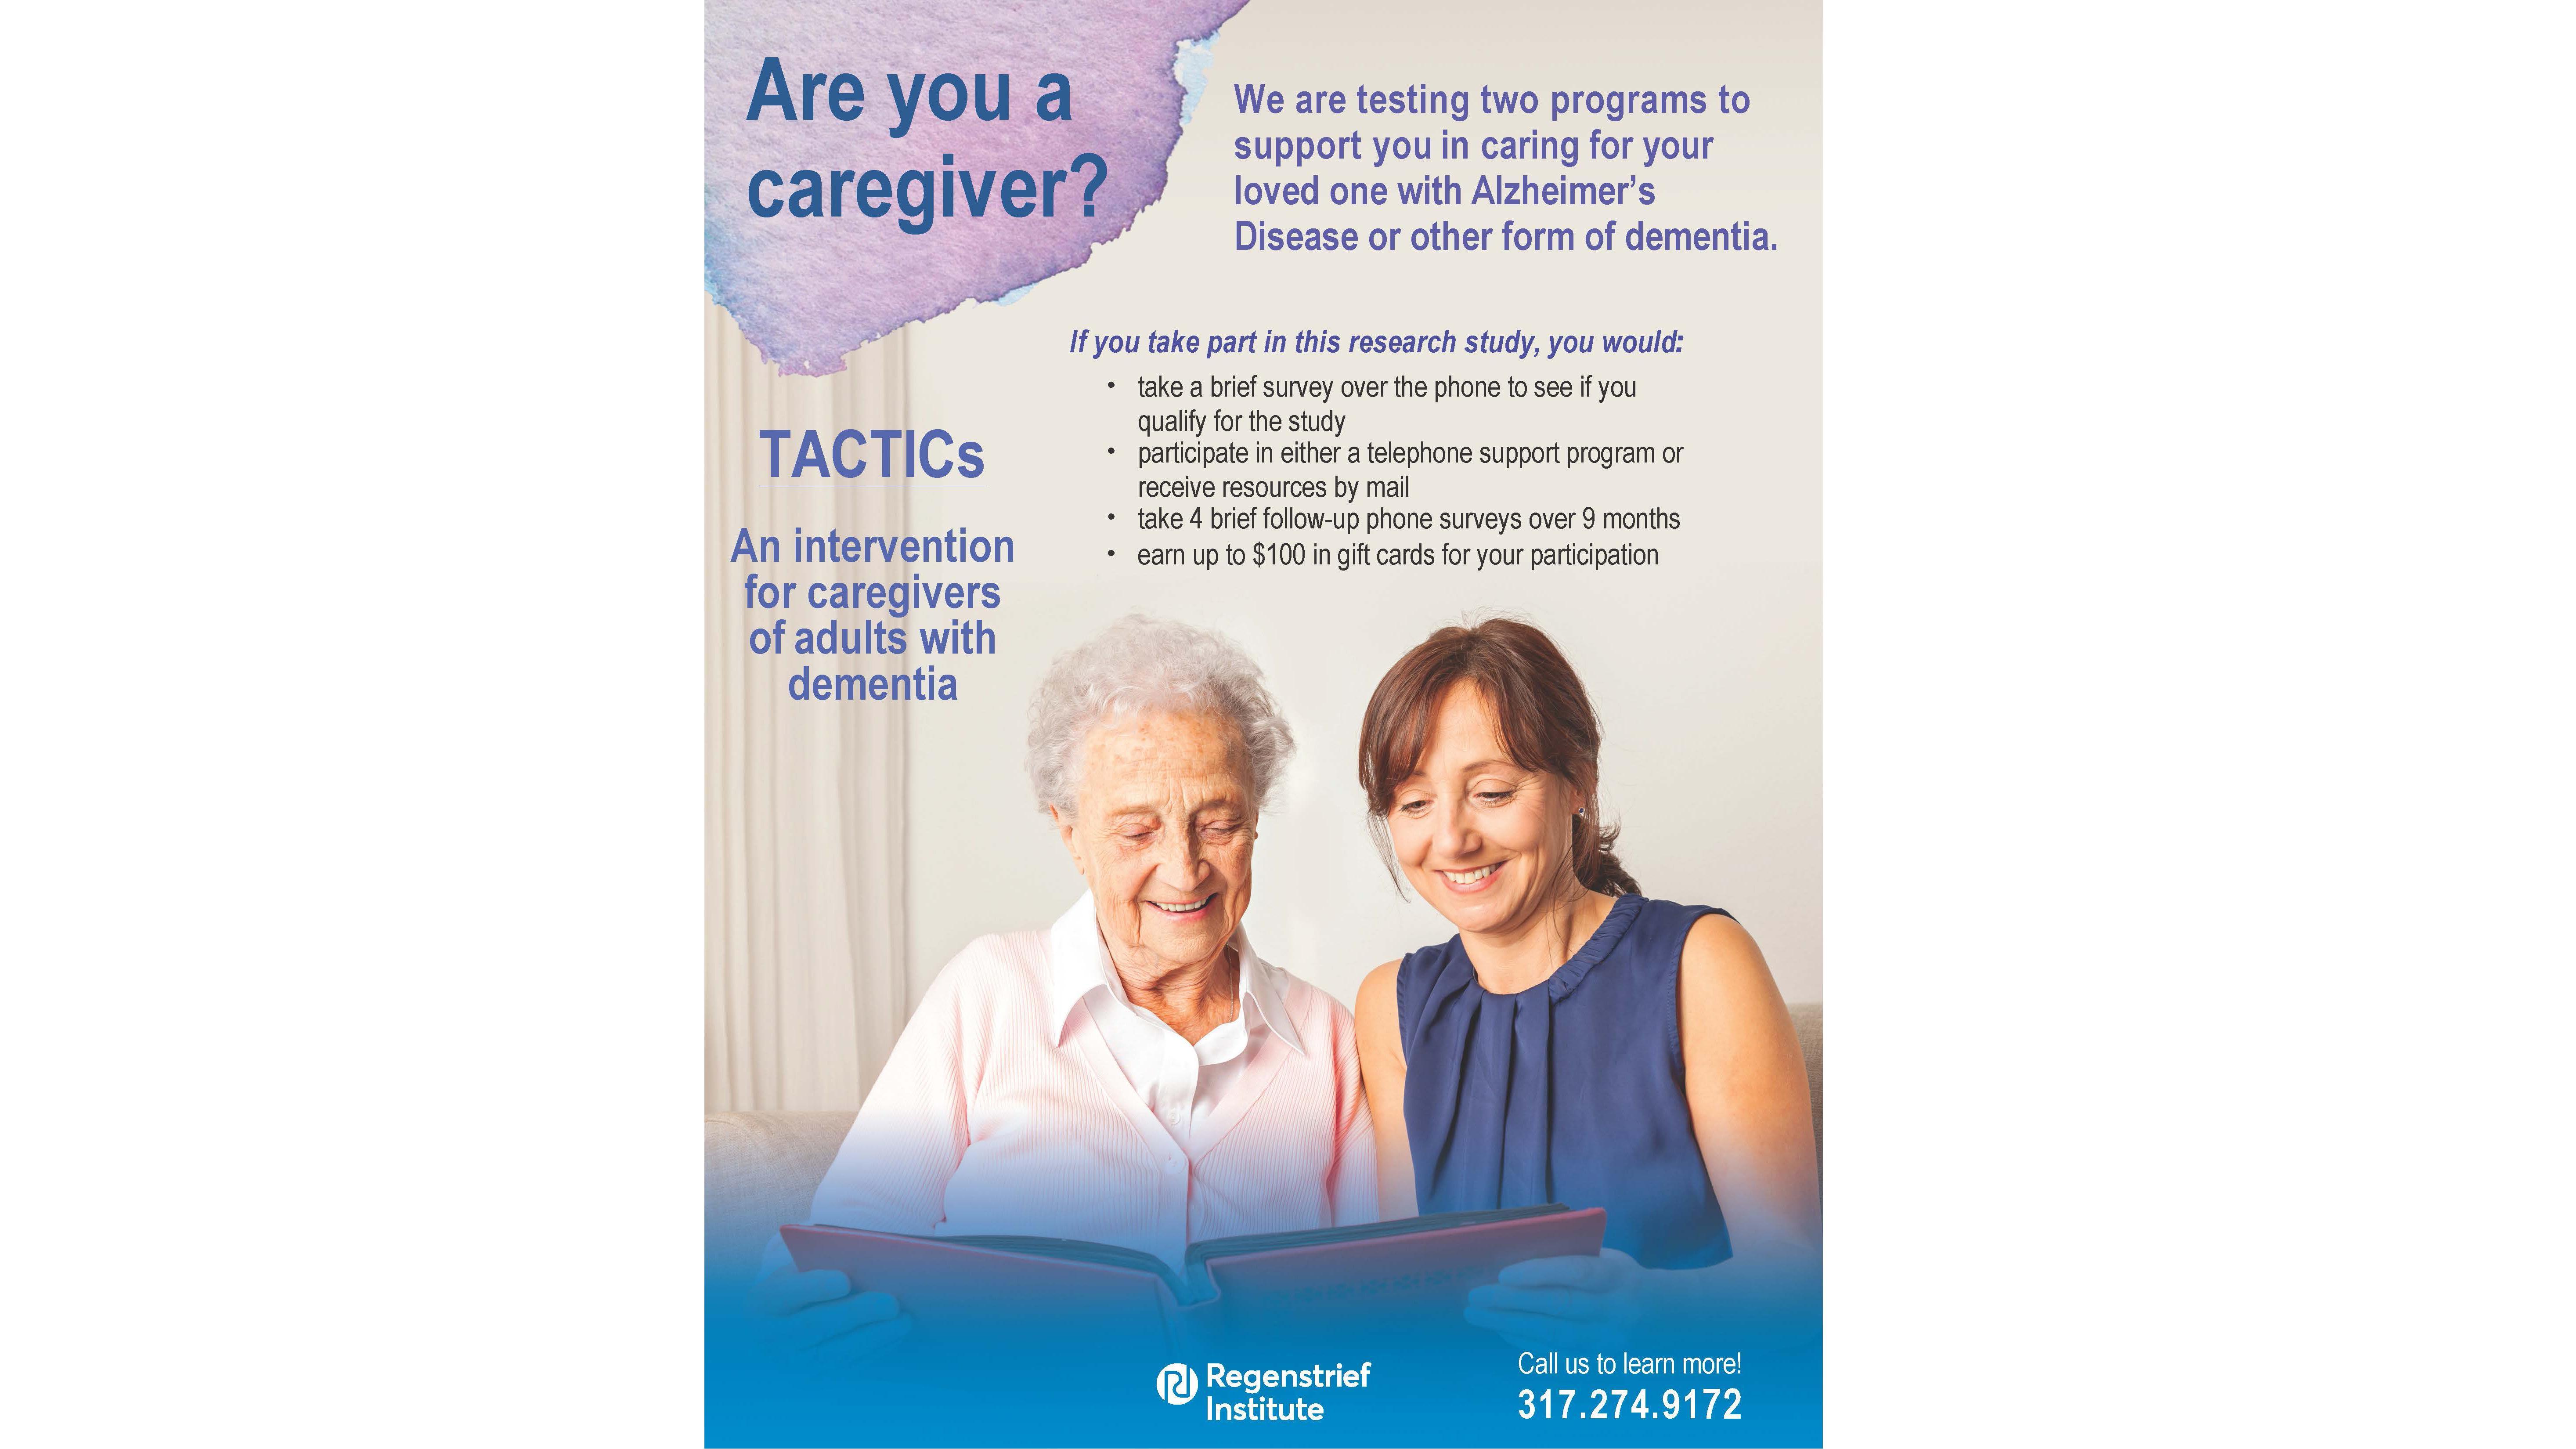 ARE YOU THE CAREGIVER OF A LOVED ONE WITH ALZHEIMER'S OR DEMENTIA? Join Our Study!